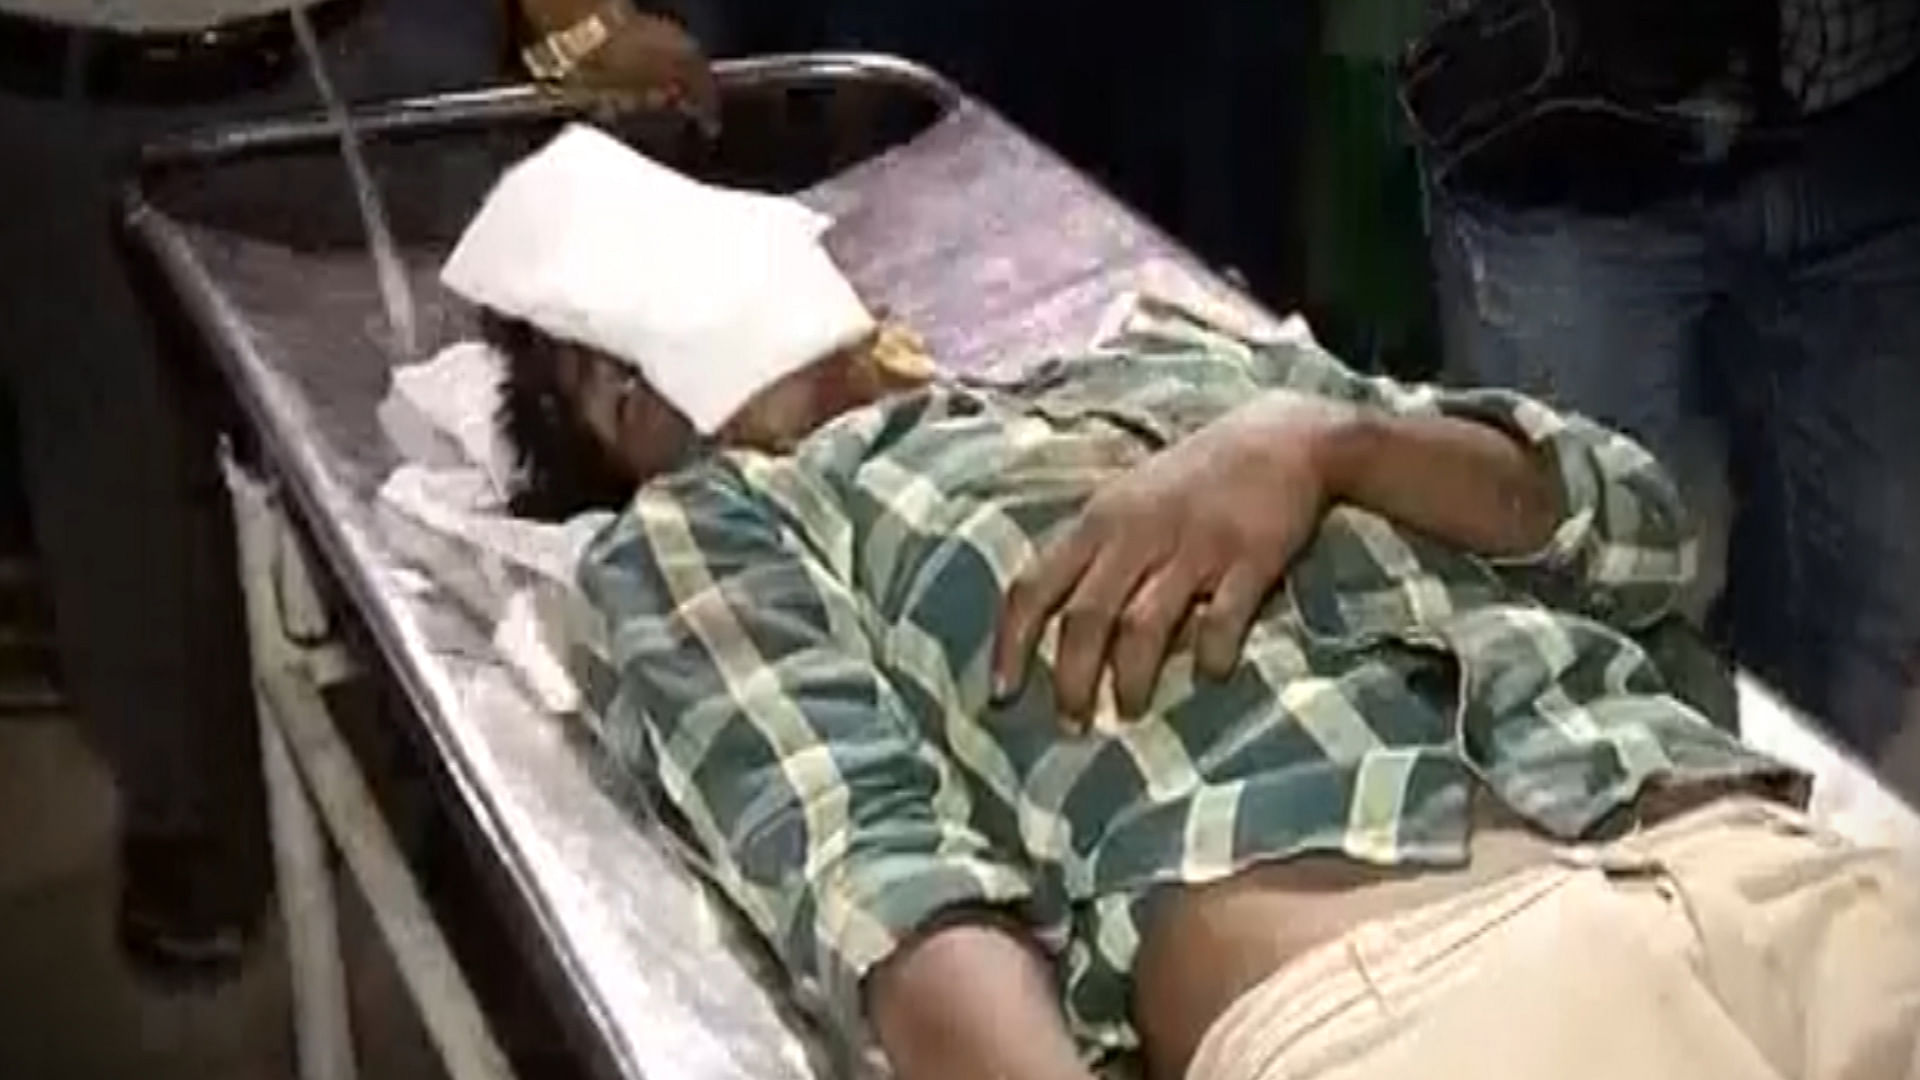 The victim, identified as P Krishna (15), was found lying on railway tracks near Mancheswar railway station in an unconscious state. (Photo: ANI screengrab)